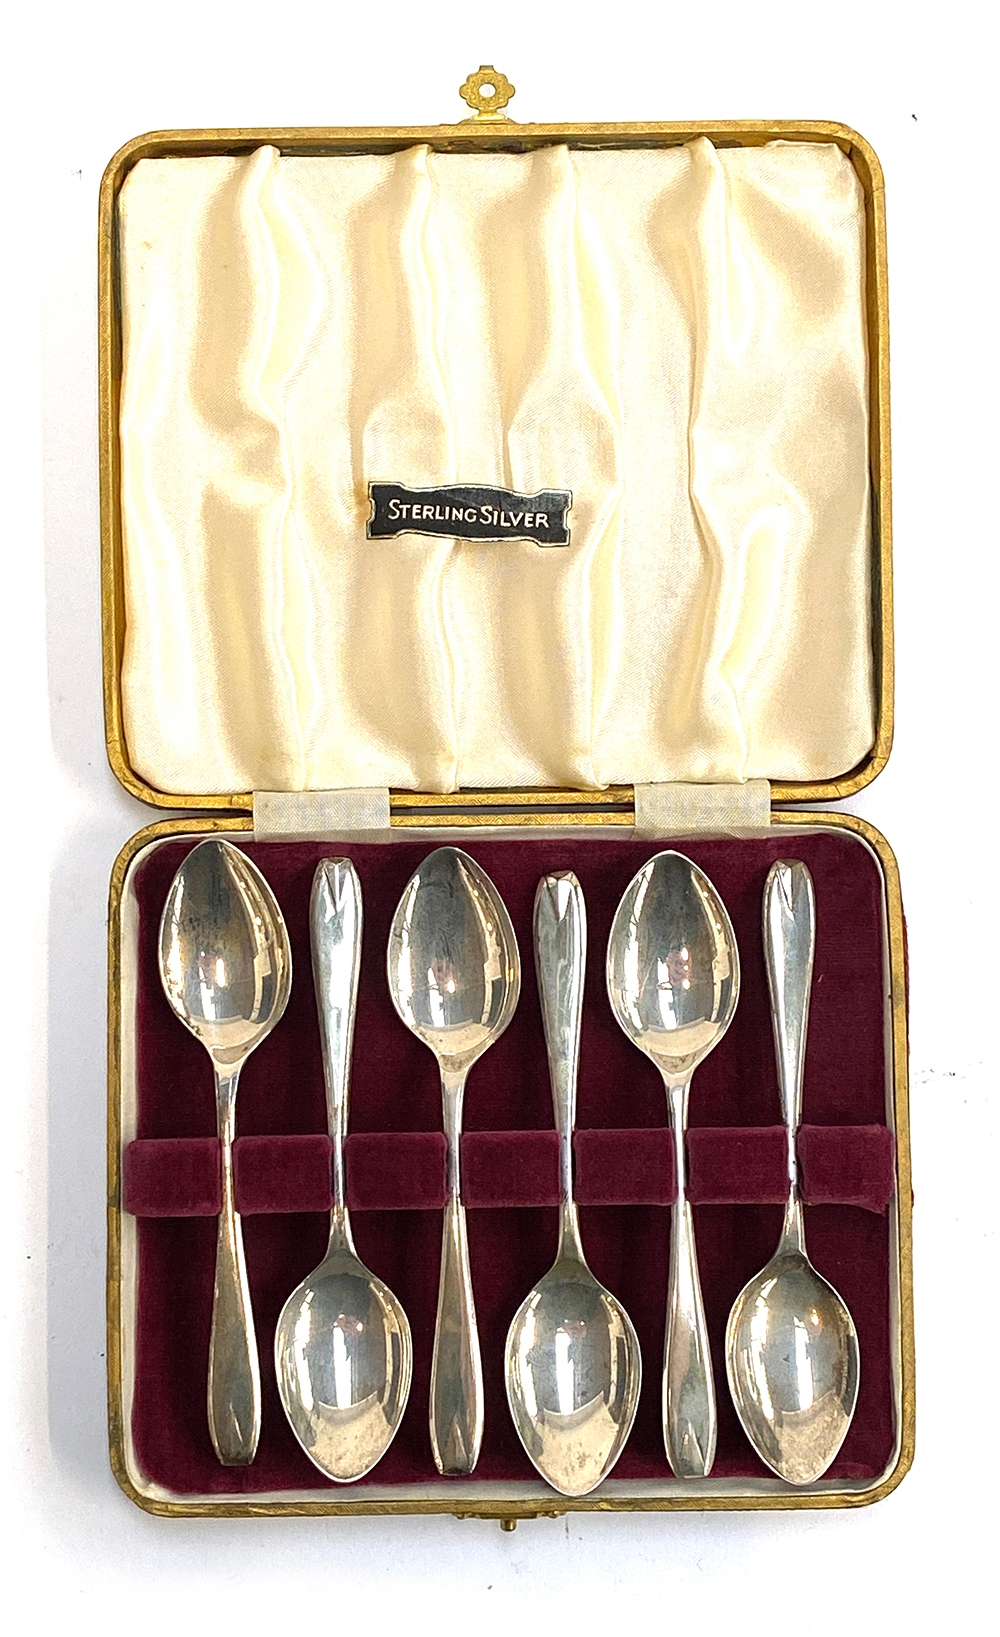 A cased set of six silver teaspoons, hallmarked for Viners, 1956